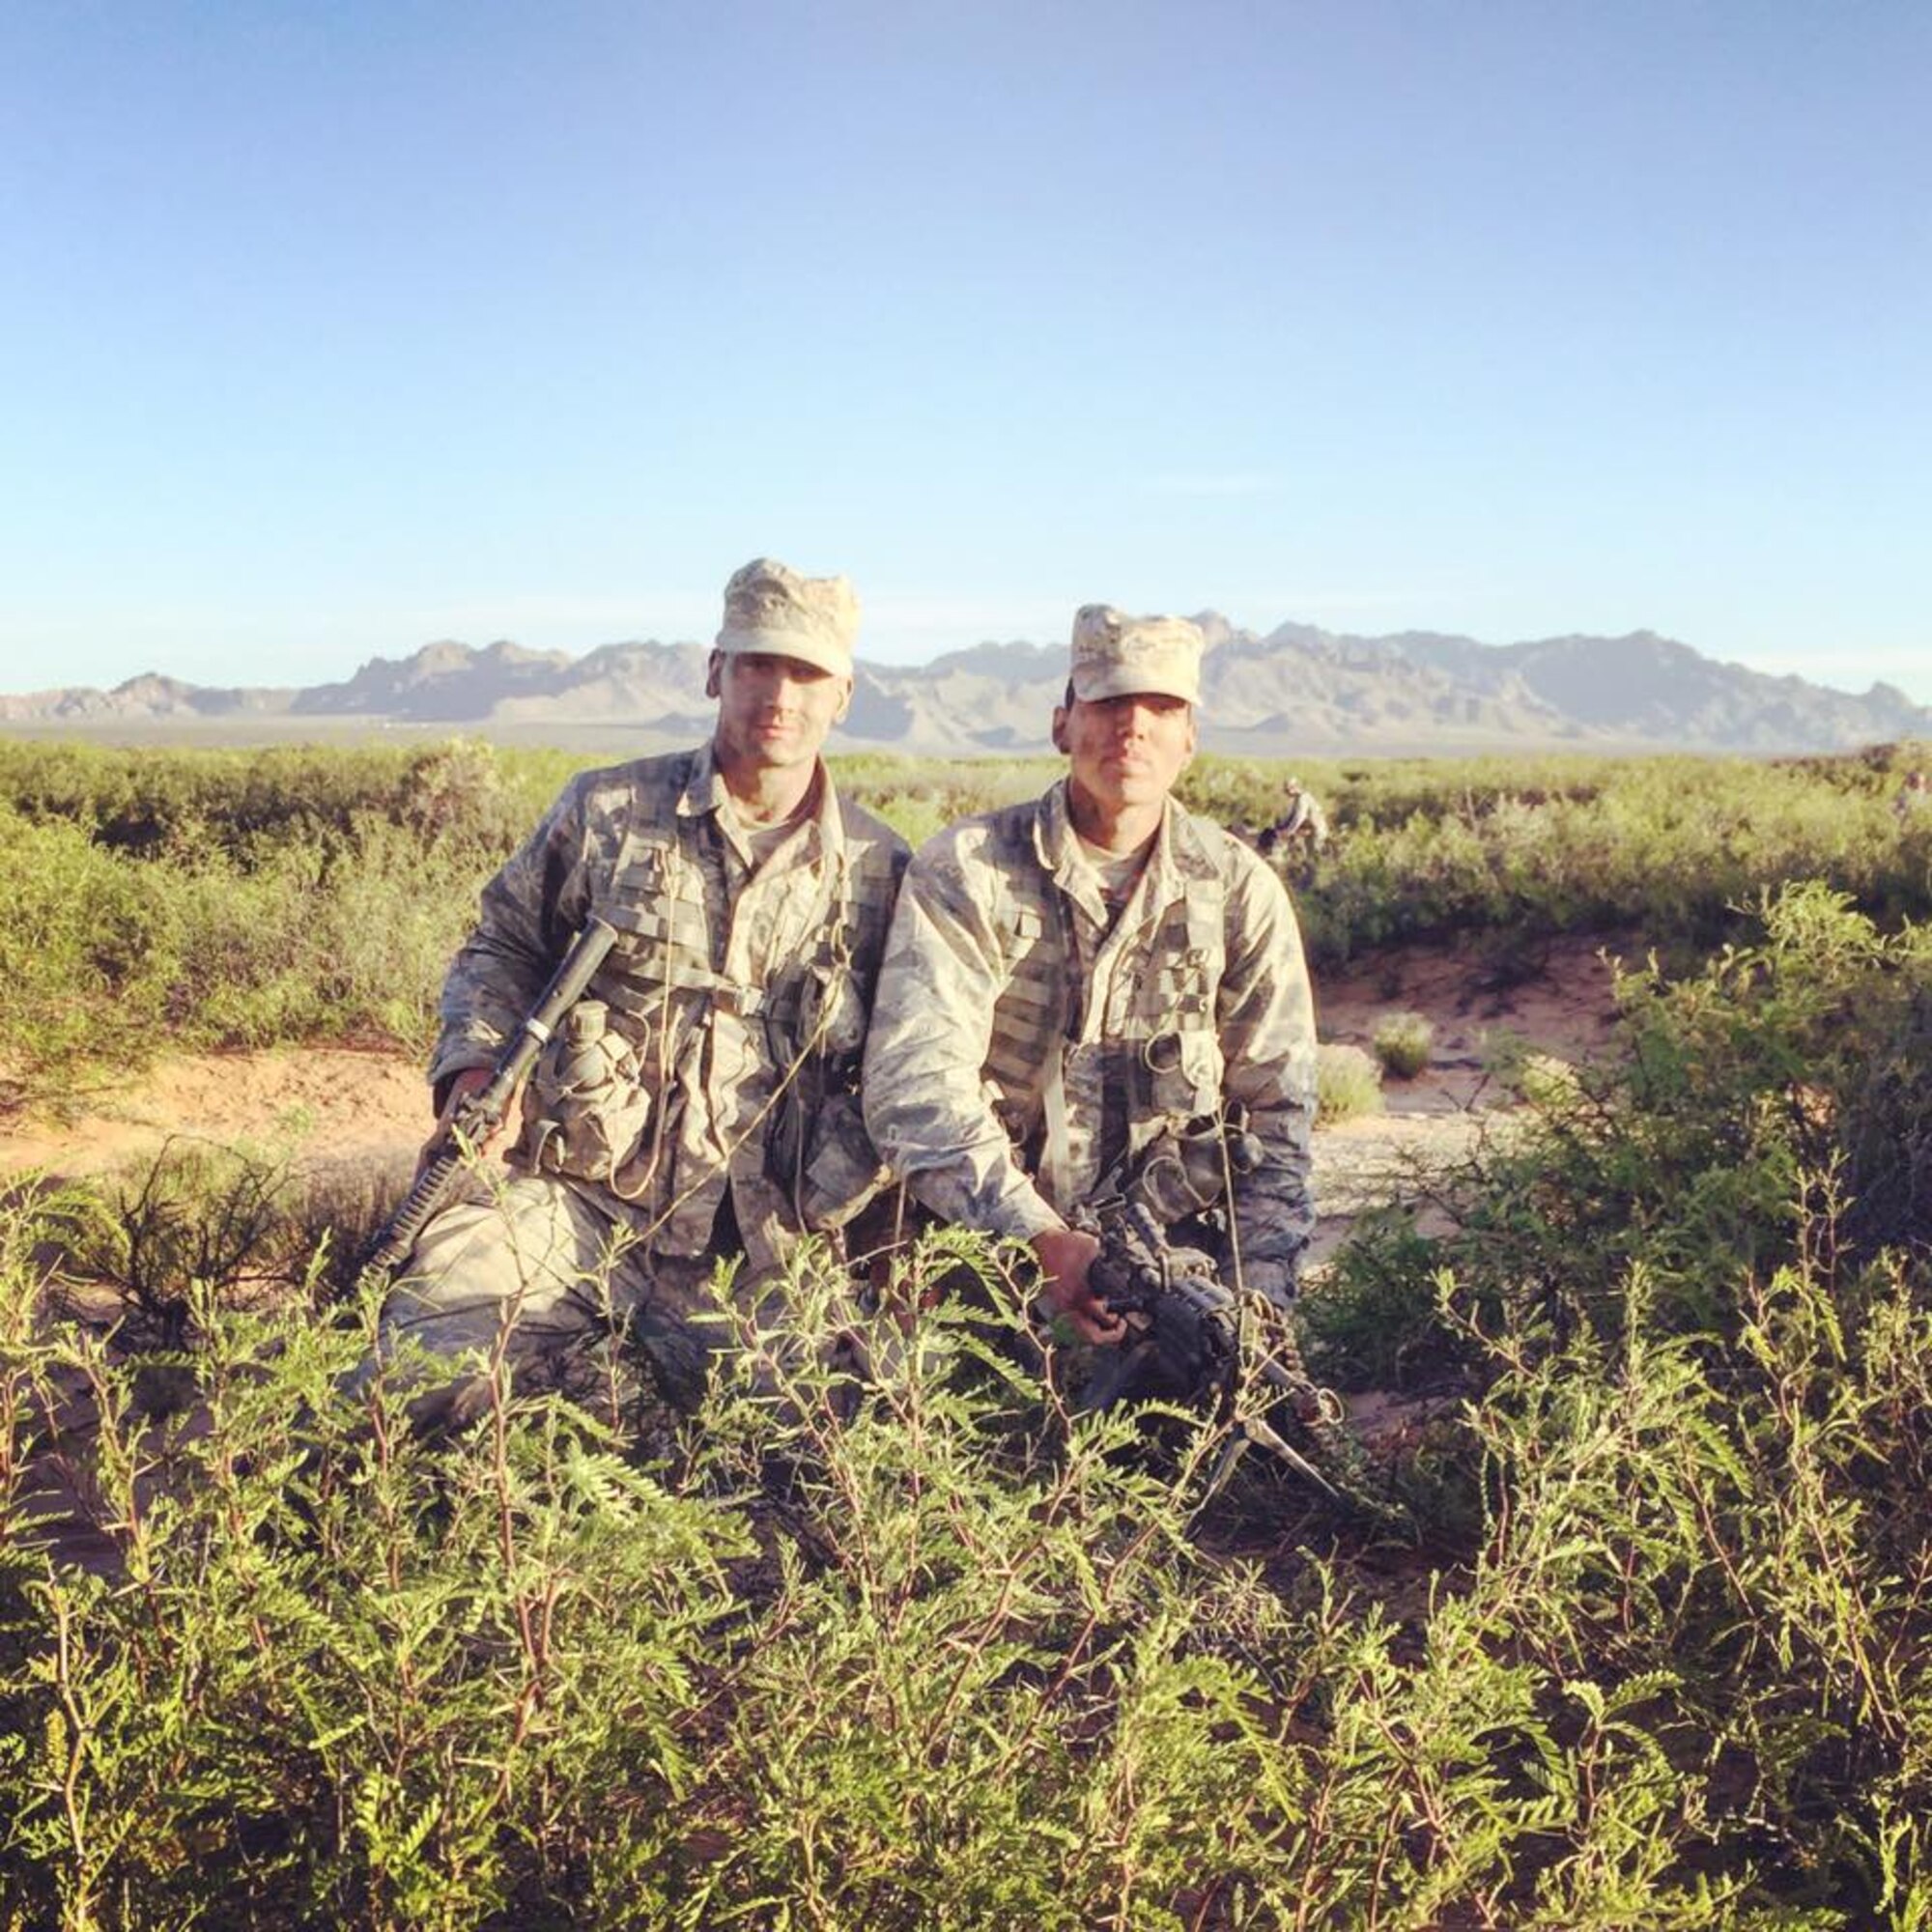 Staff Sgt. Lee Cundiff, 31st Civil Engineer Squadron explosive ordnance disposal technician, and Staff Sgt. Ricardo Salinas, 31st Aircraft Maintenance Squadron designated crew chief, pose during a Ranger Assessment Course, in Fort Bliss, Texas. The RAC is a grueling 15-day course designed to put U.S. Armed Forces members through the toughest of combat related tasks to prepare them for Ranger School. (Courtesy photo)